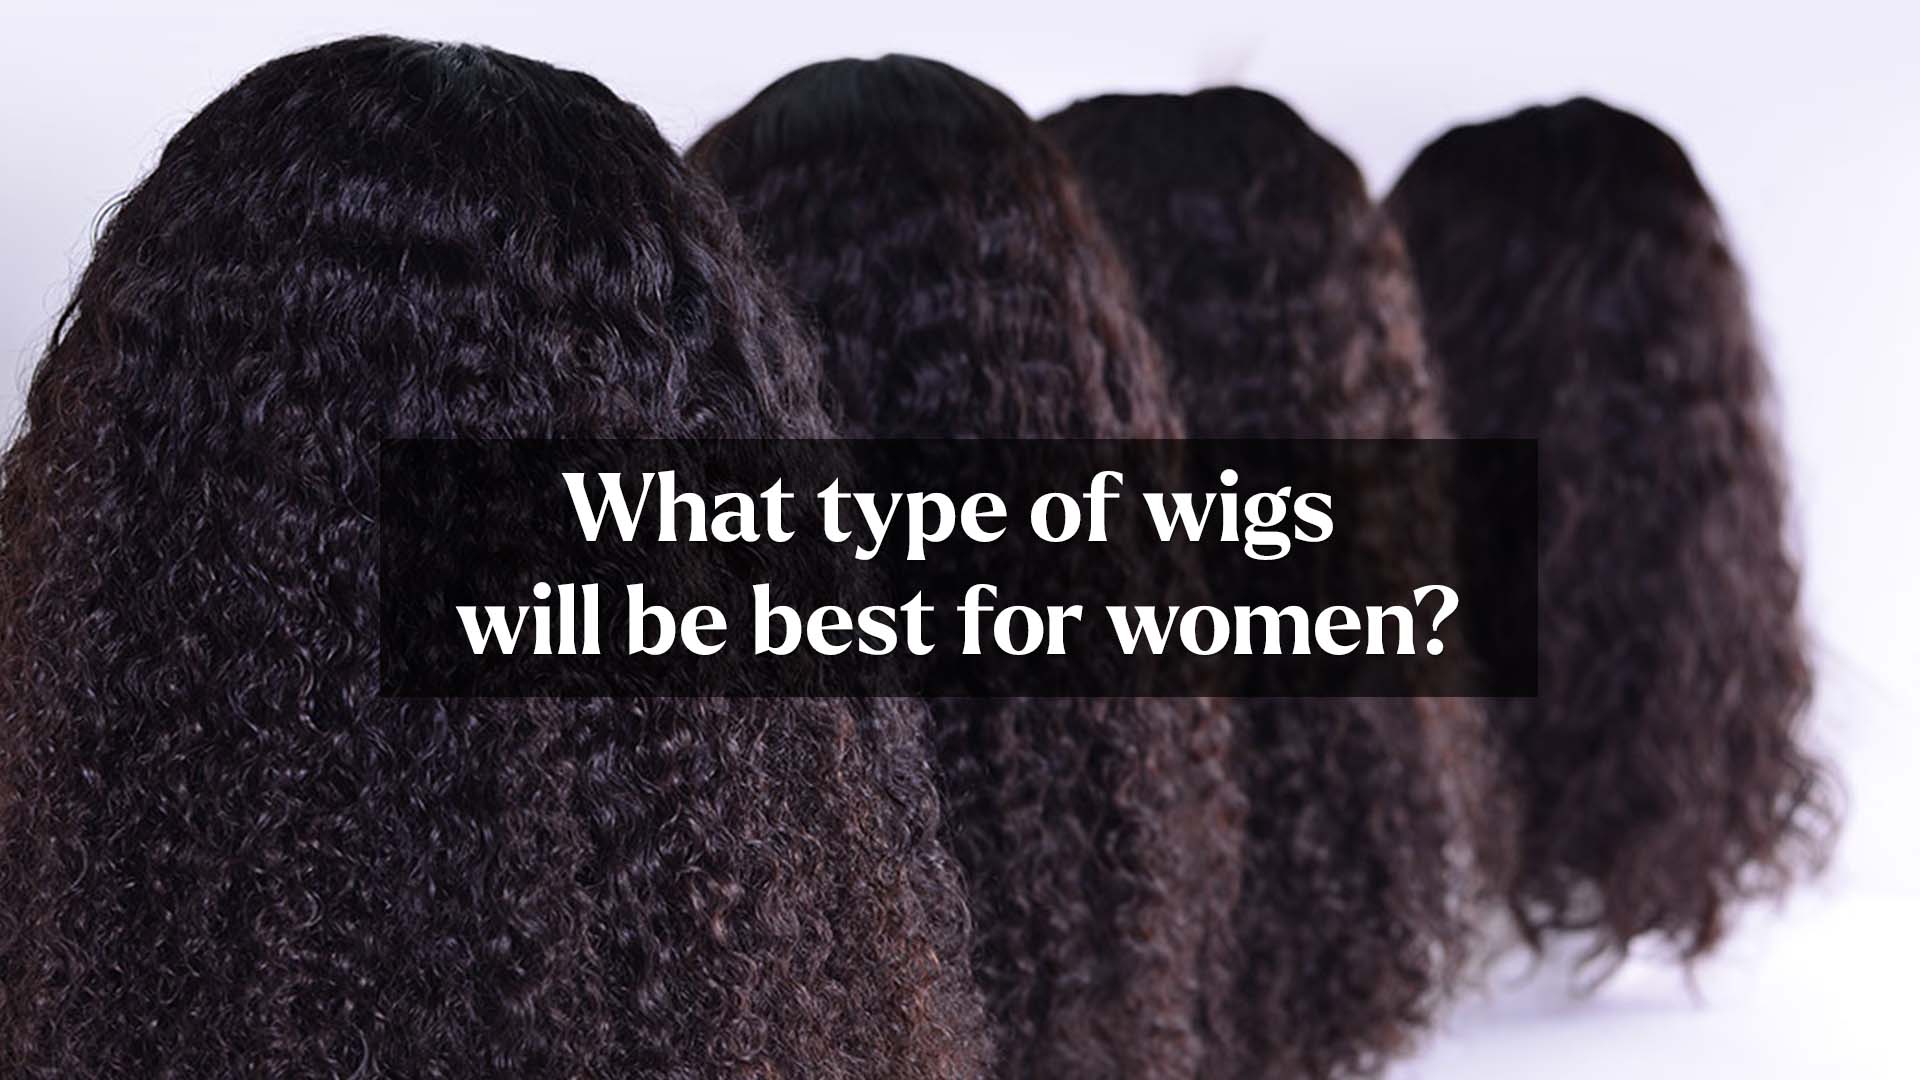 What type of wigs will be best for women?